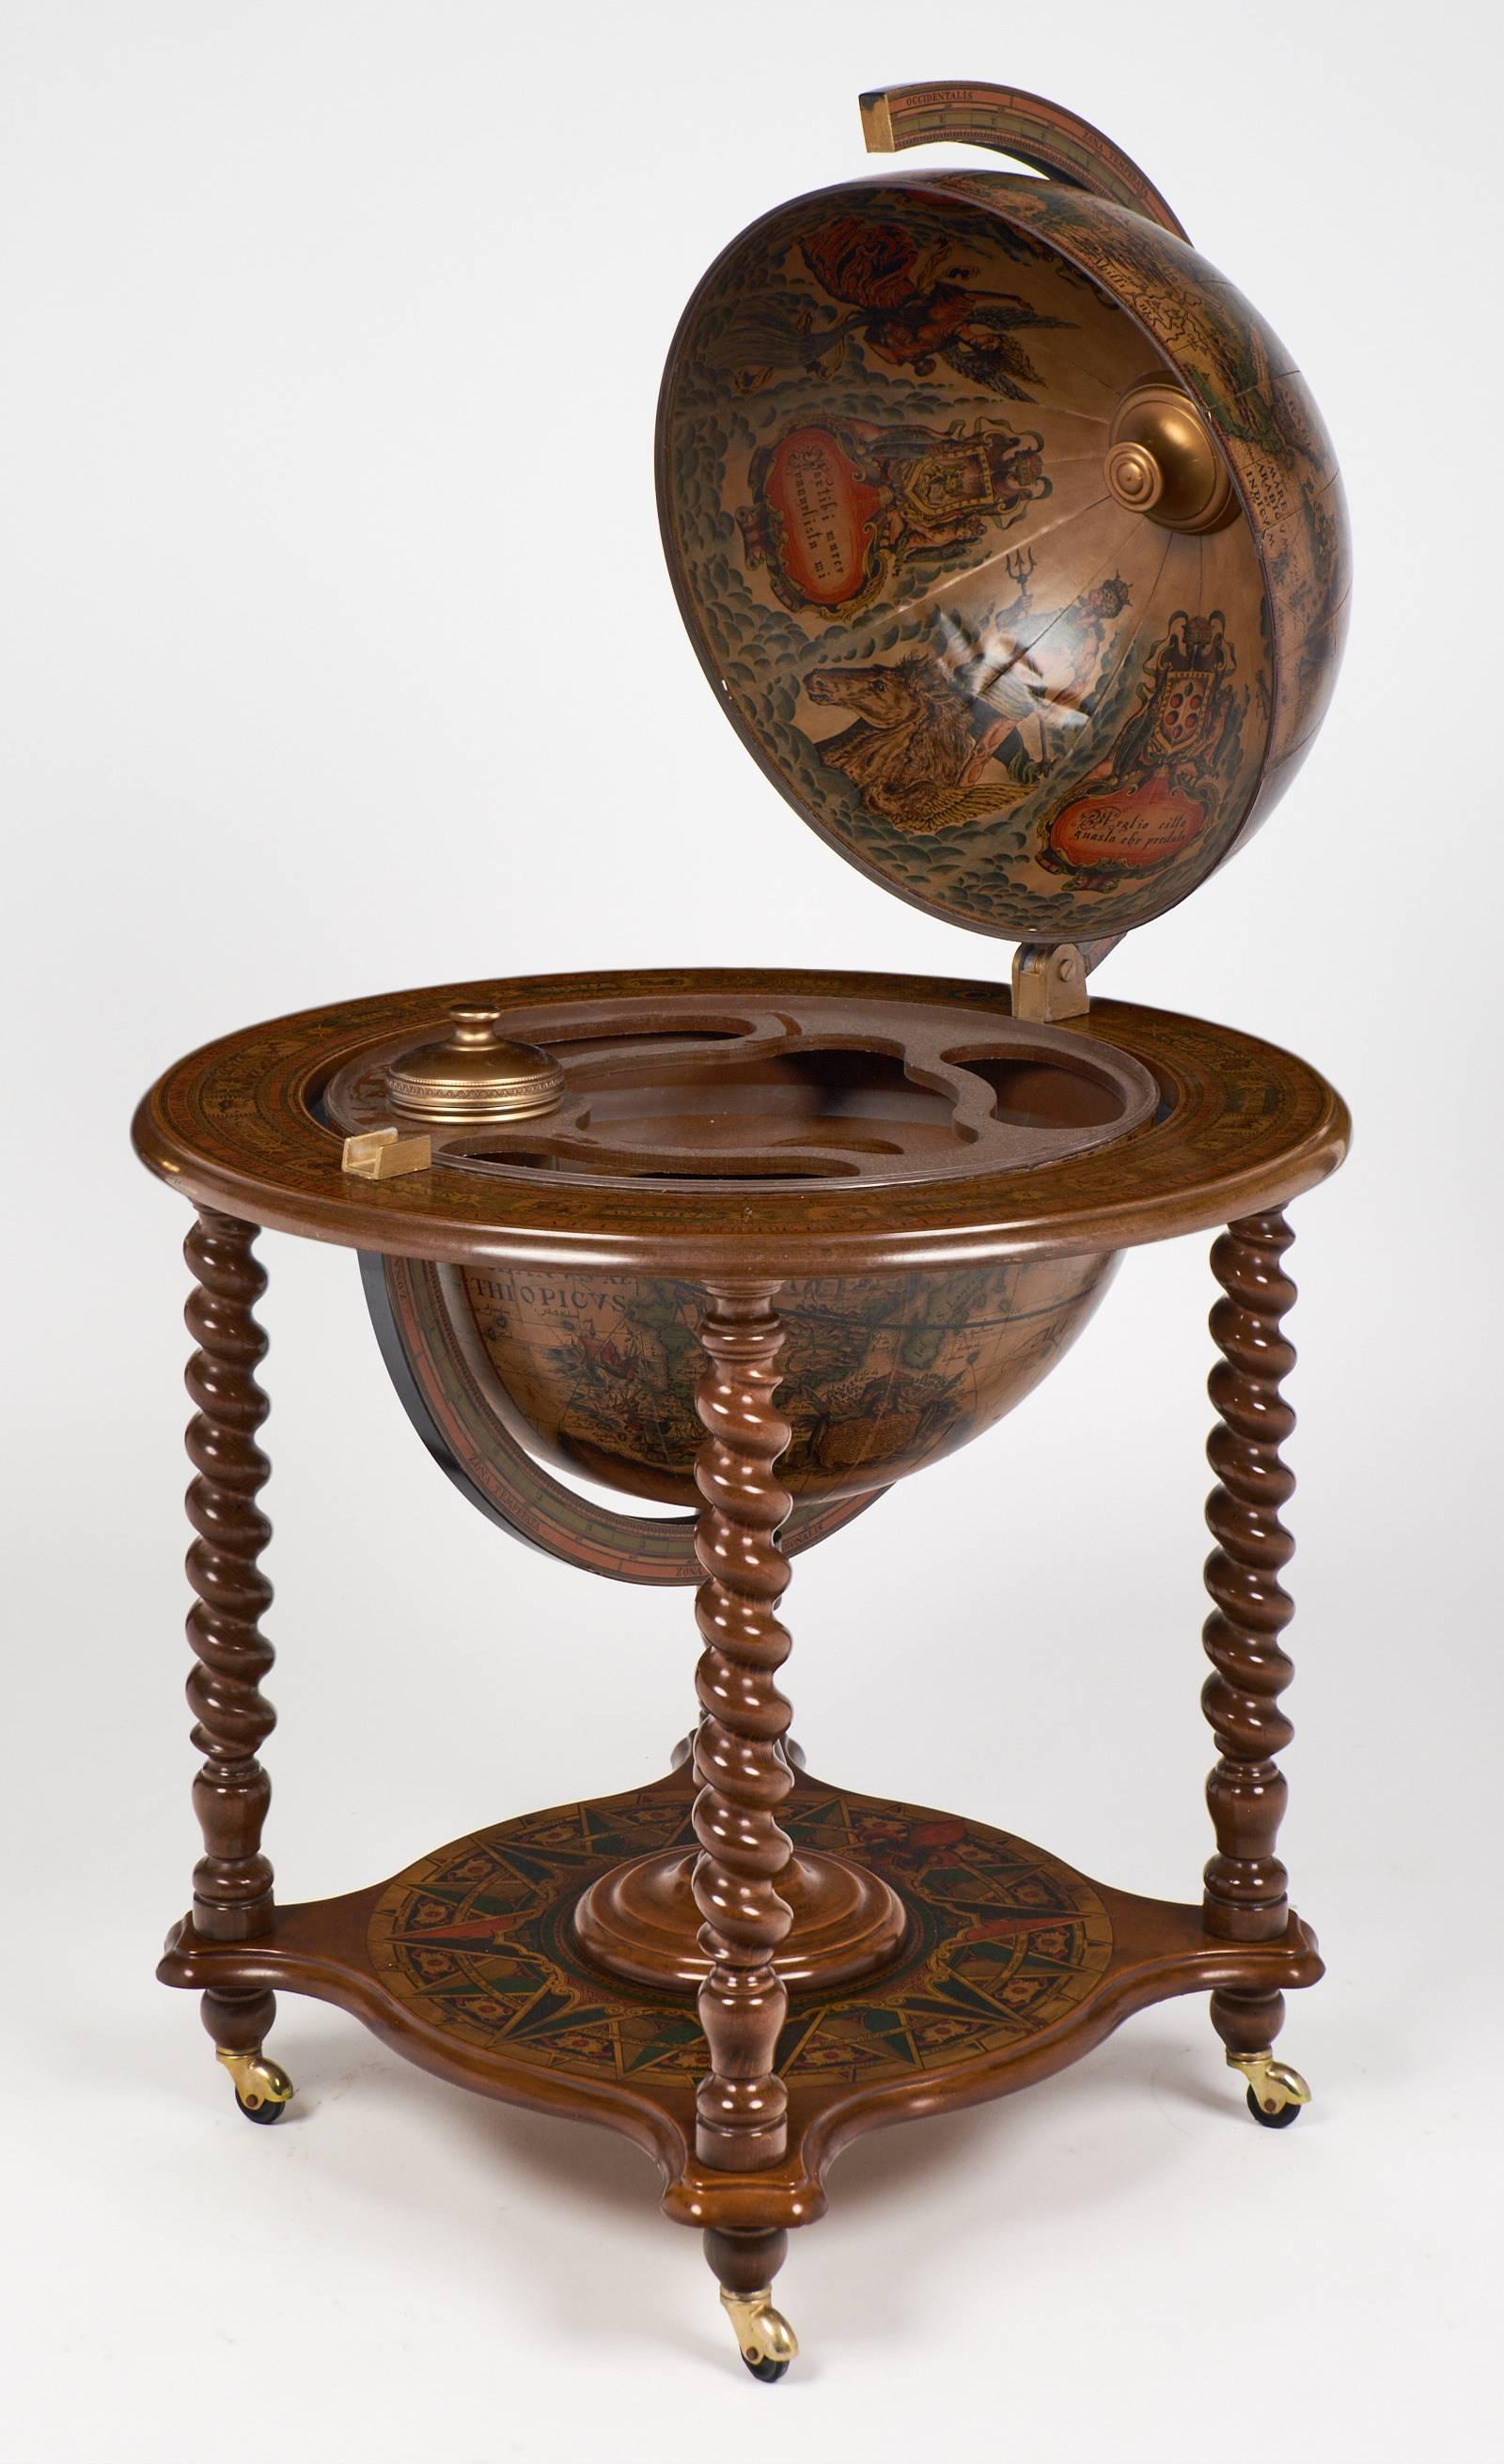 Mad Men era dry bar hidden inside a world globe, beautifully crafted with exquisite detail inside and out. The interior is compartmentalized to hold all your bar ware, and includes an insulated bottle holder. Exterior shows a 17th century world